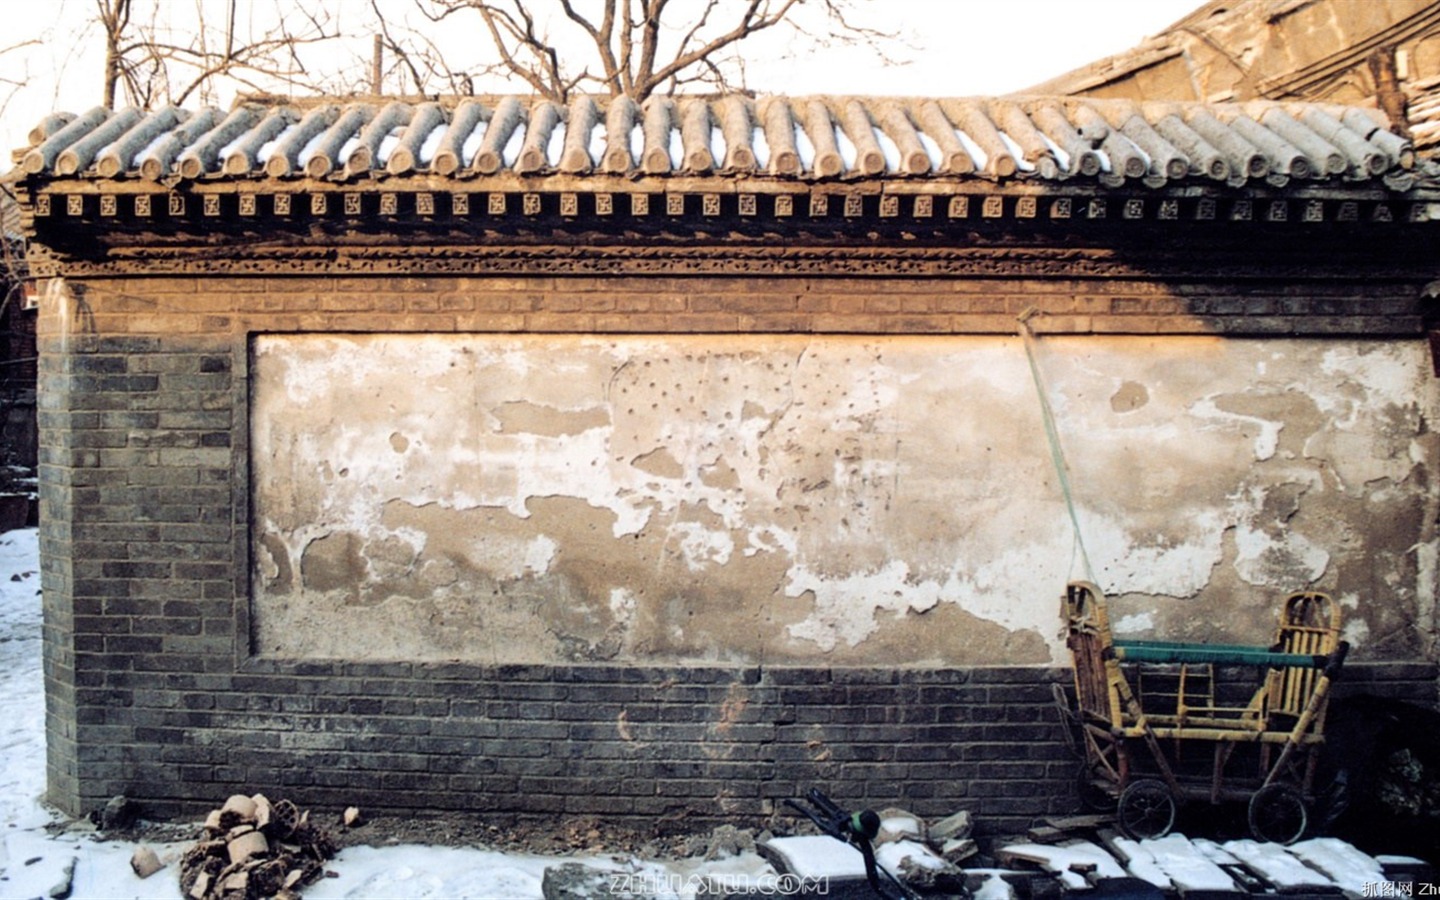 Old Hutong life for old photos wallpaper #23 - 1440x900